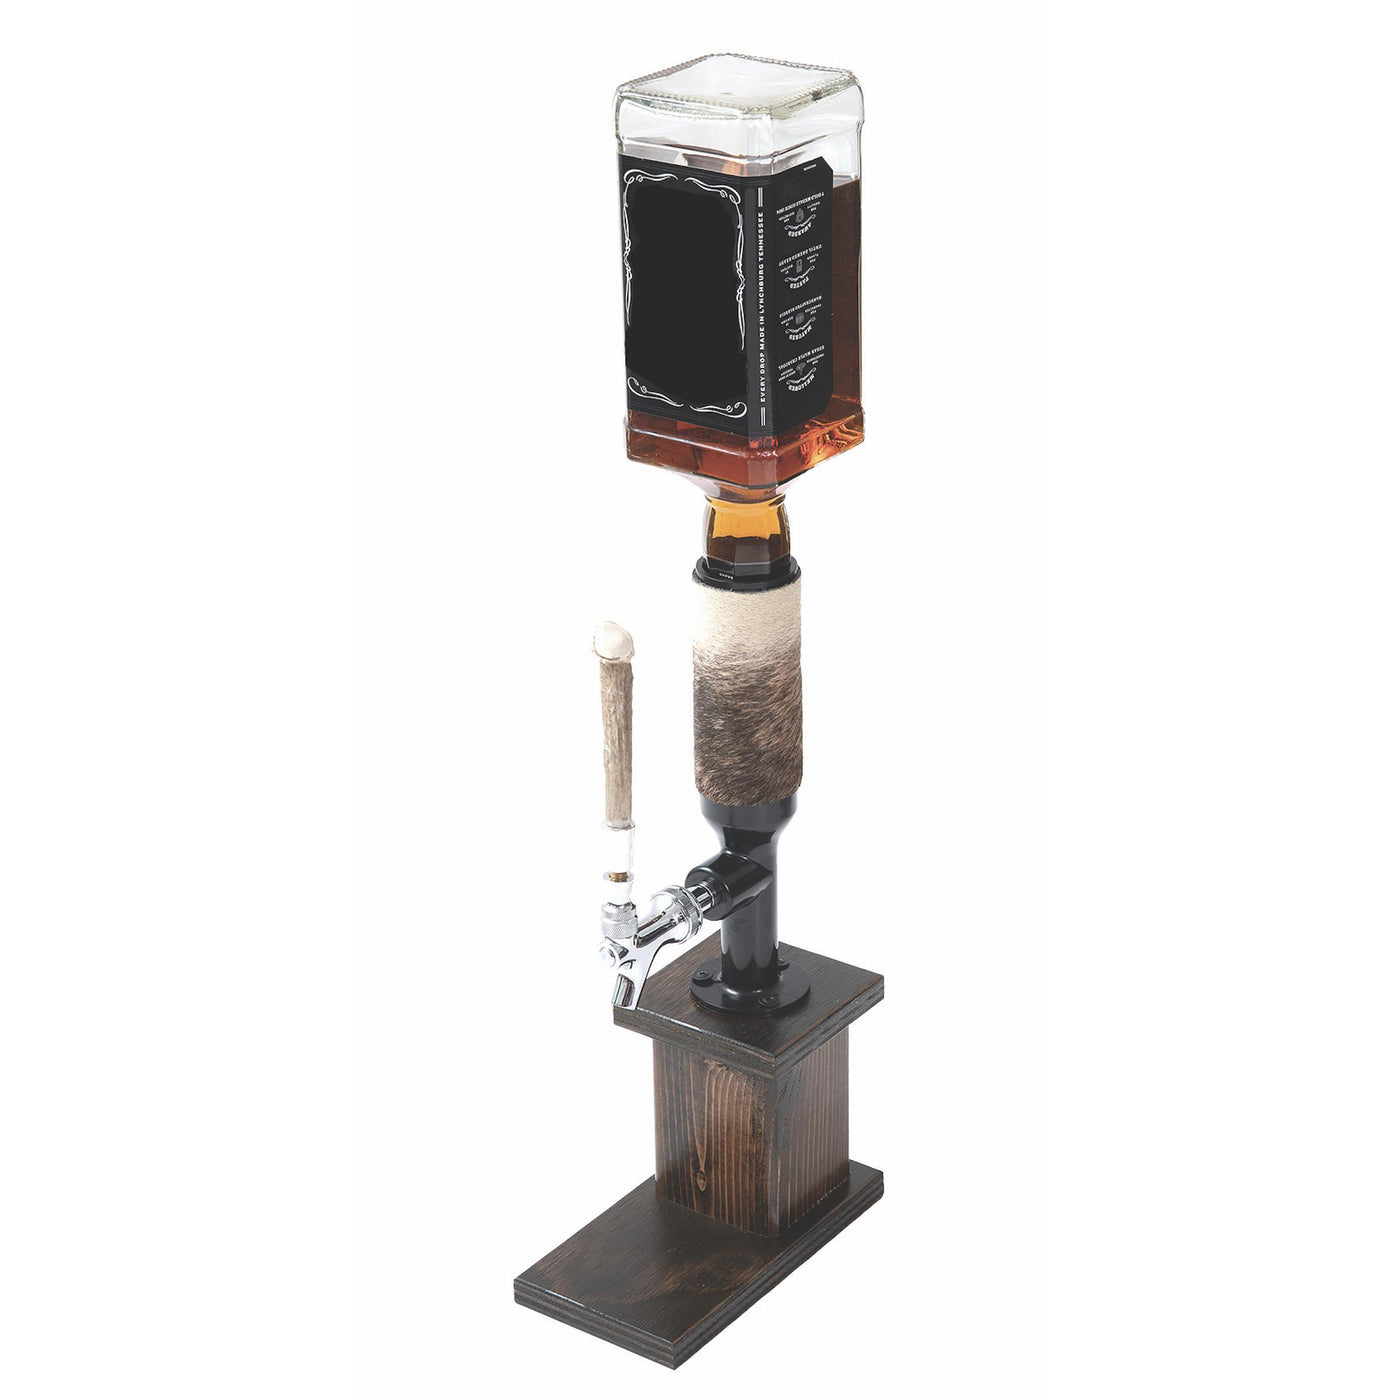 Single Whiskey Tower Liquor Dispenser-HOME/GIFTWARE-Kevin's Fine Outdoor Gear & Apparel